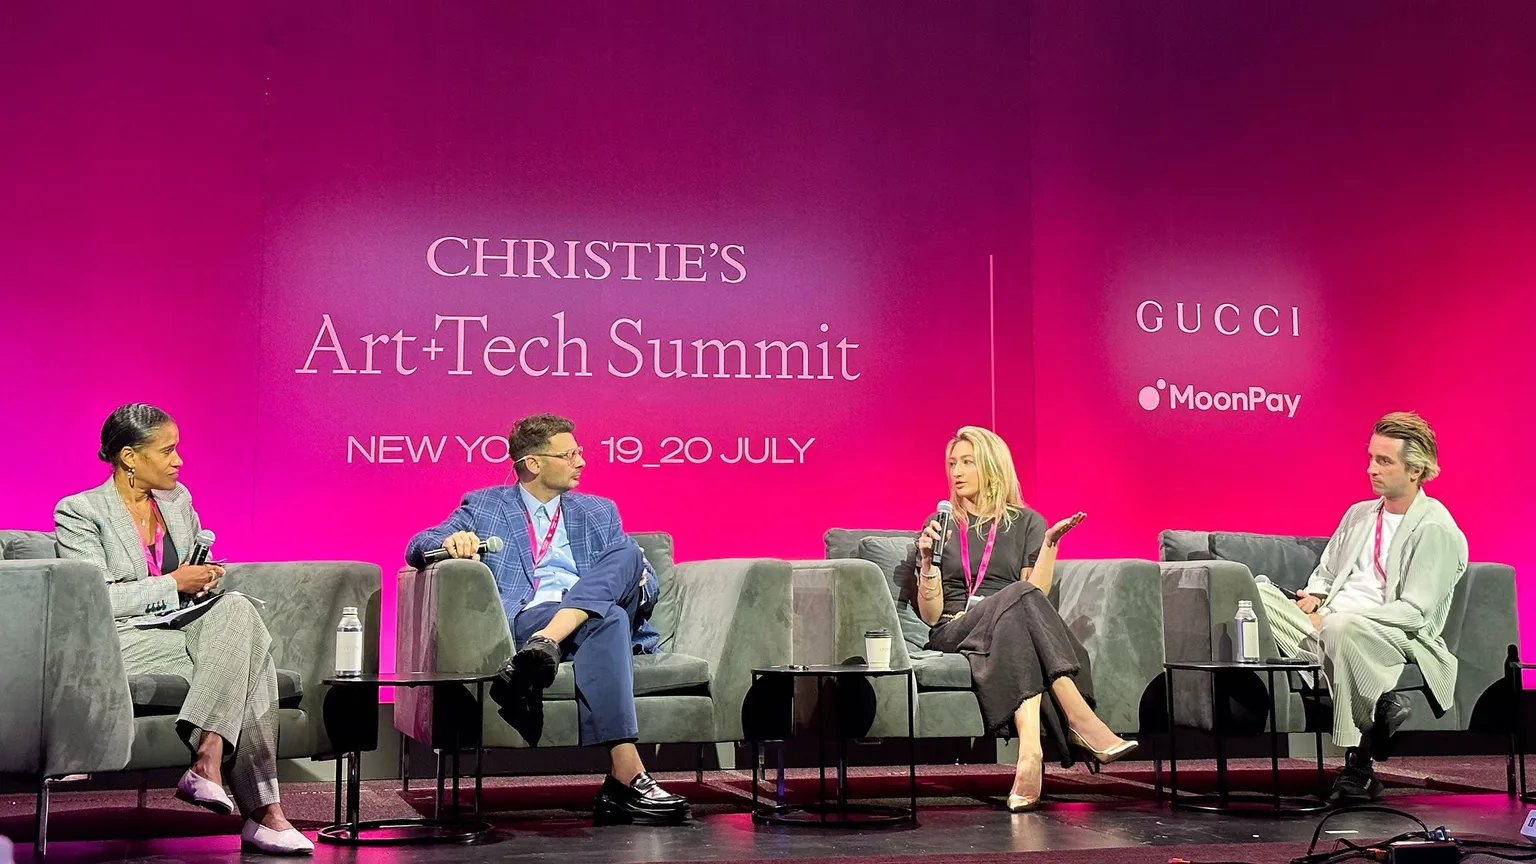 The Museums and Galleries Panel at Christie's Art + Tech Summit. Photo by Courtney McDermid for Decrypt.